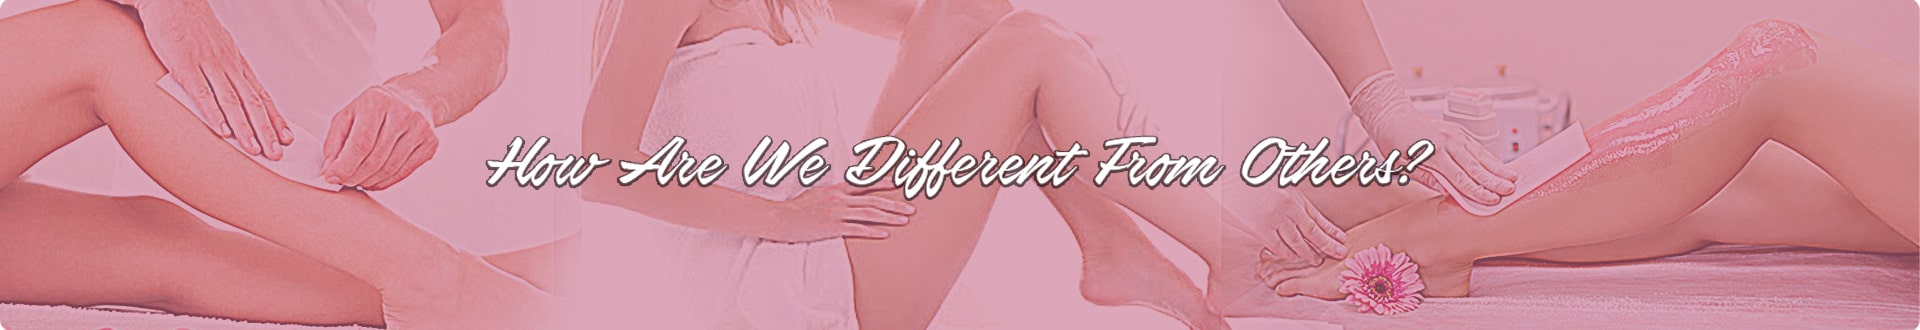 How Are We-Different From Others